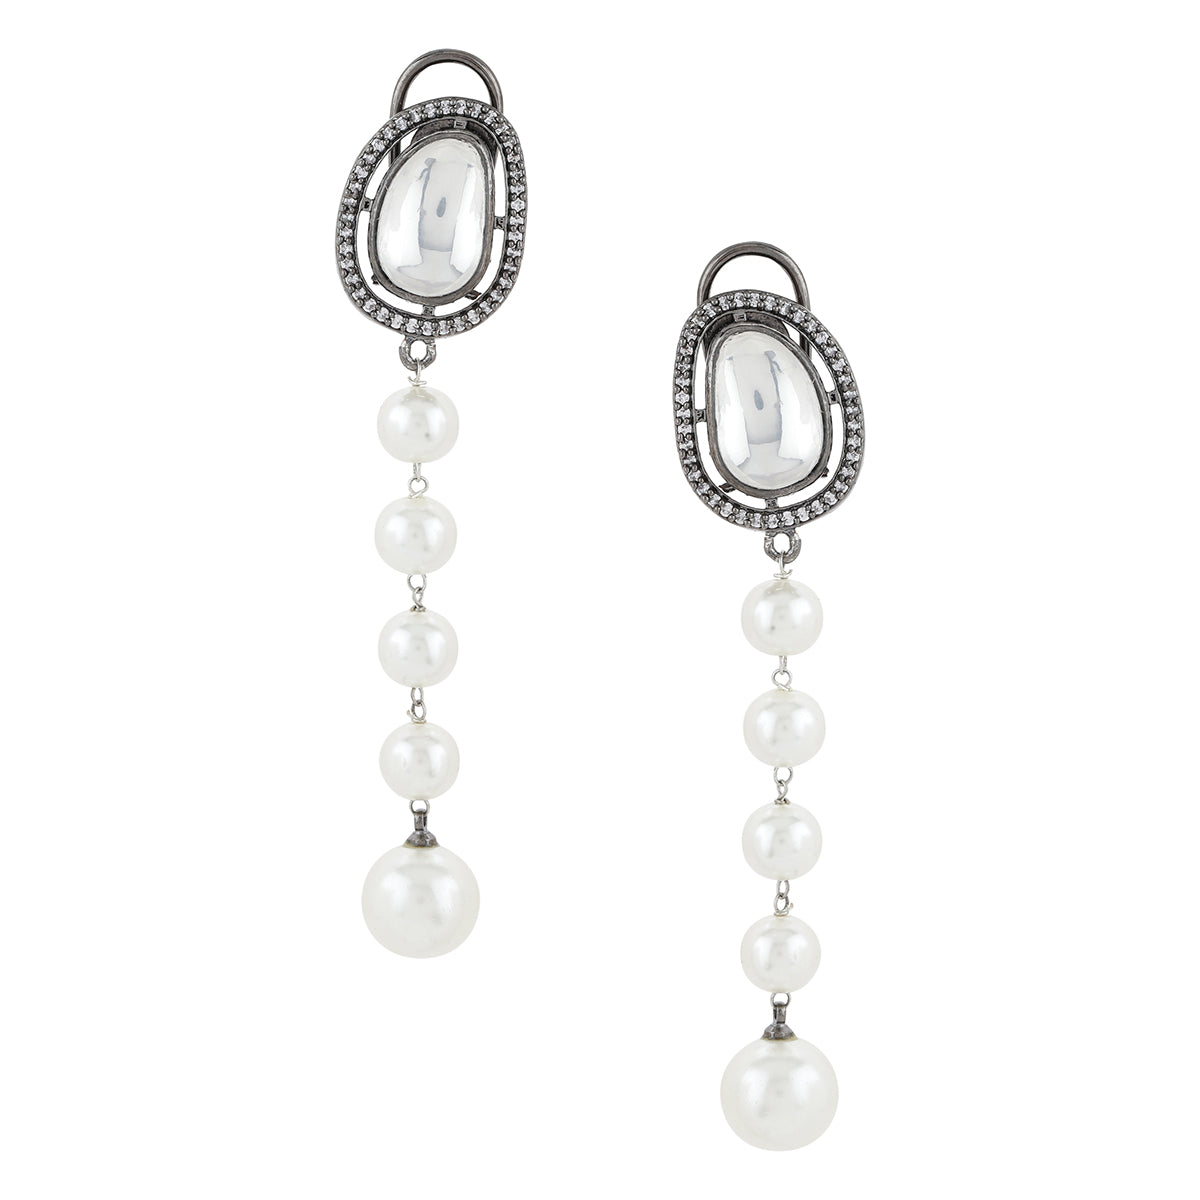 White & Grey Rhodium Plated Contemporary Drop Earrings